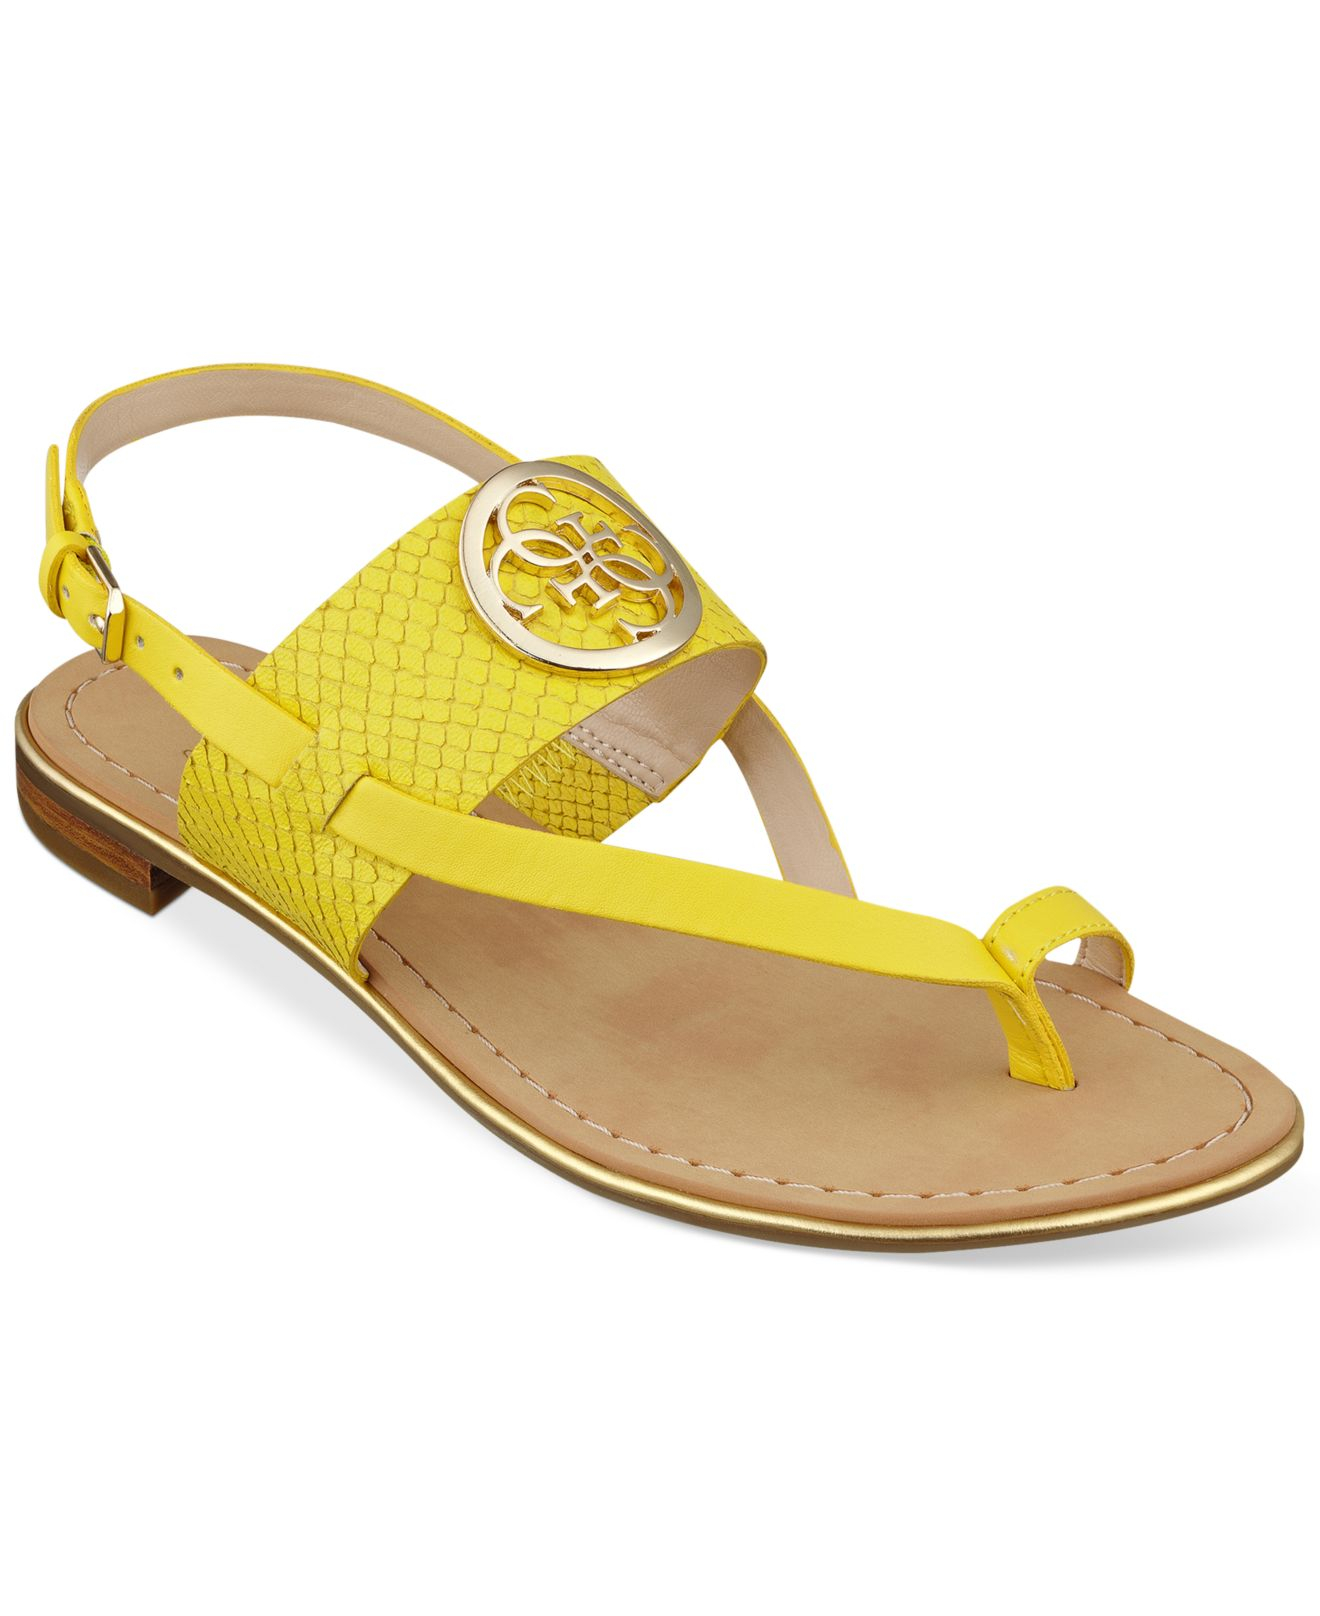 Guess Women'S Redell Flat Sandals in Yellow - Lyst